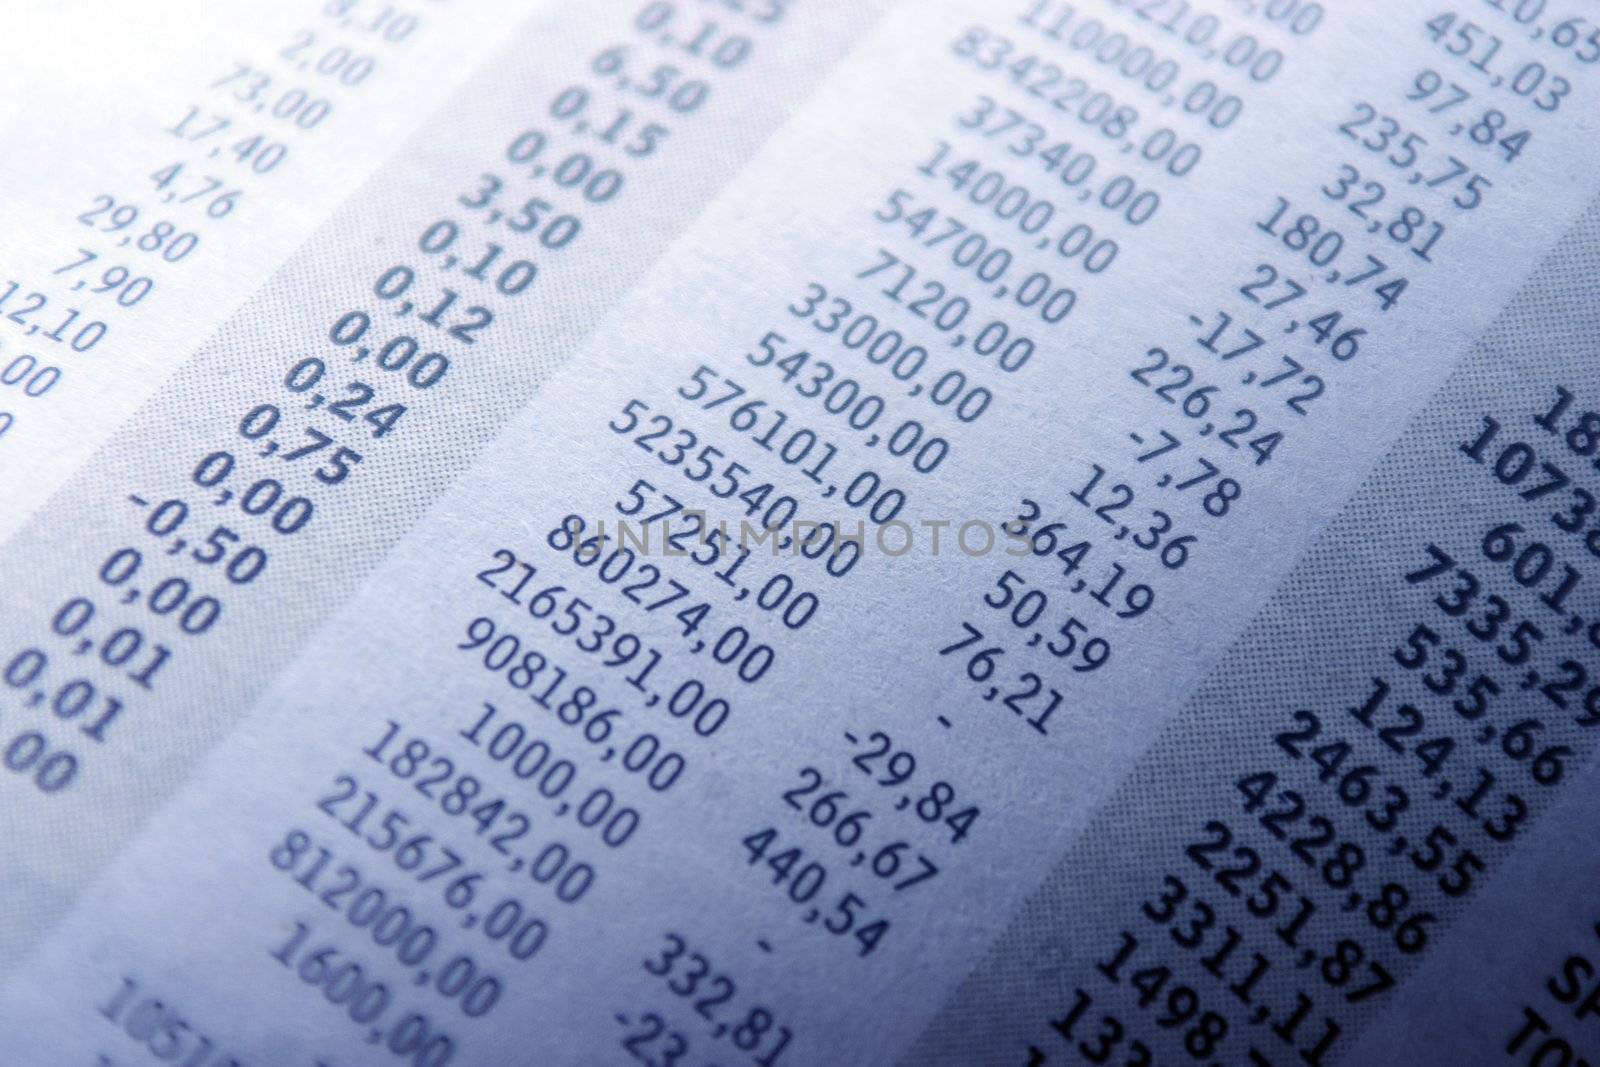 Closeup of stock quotes from a newspaper